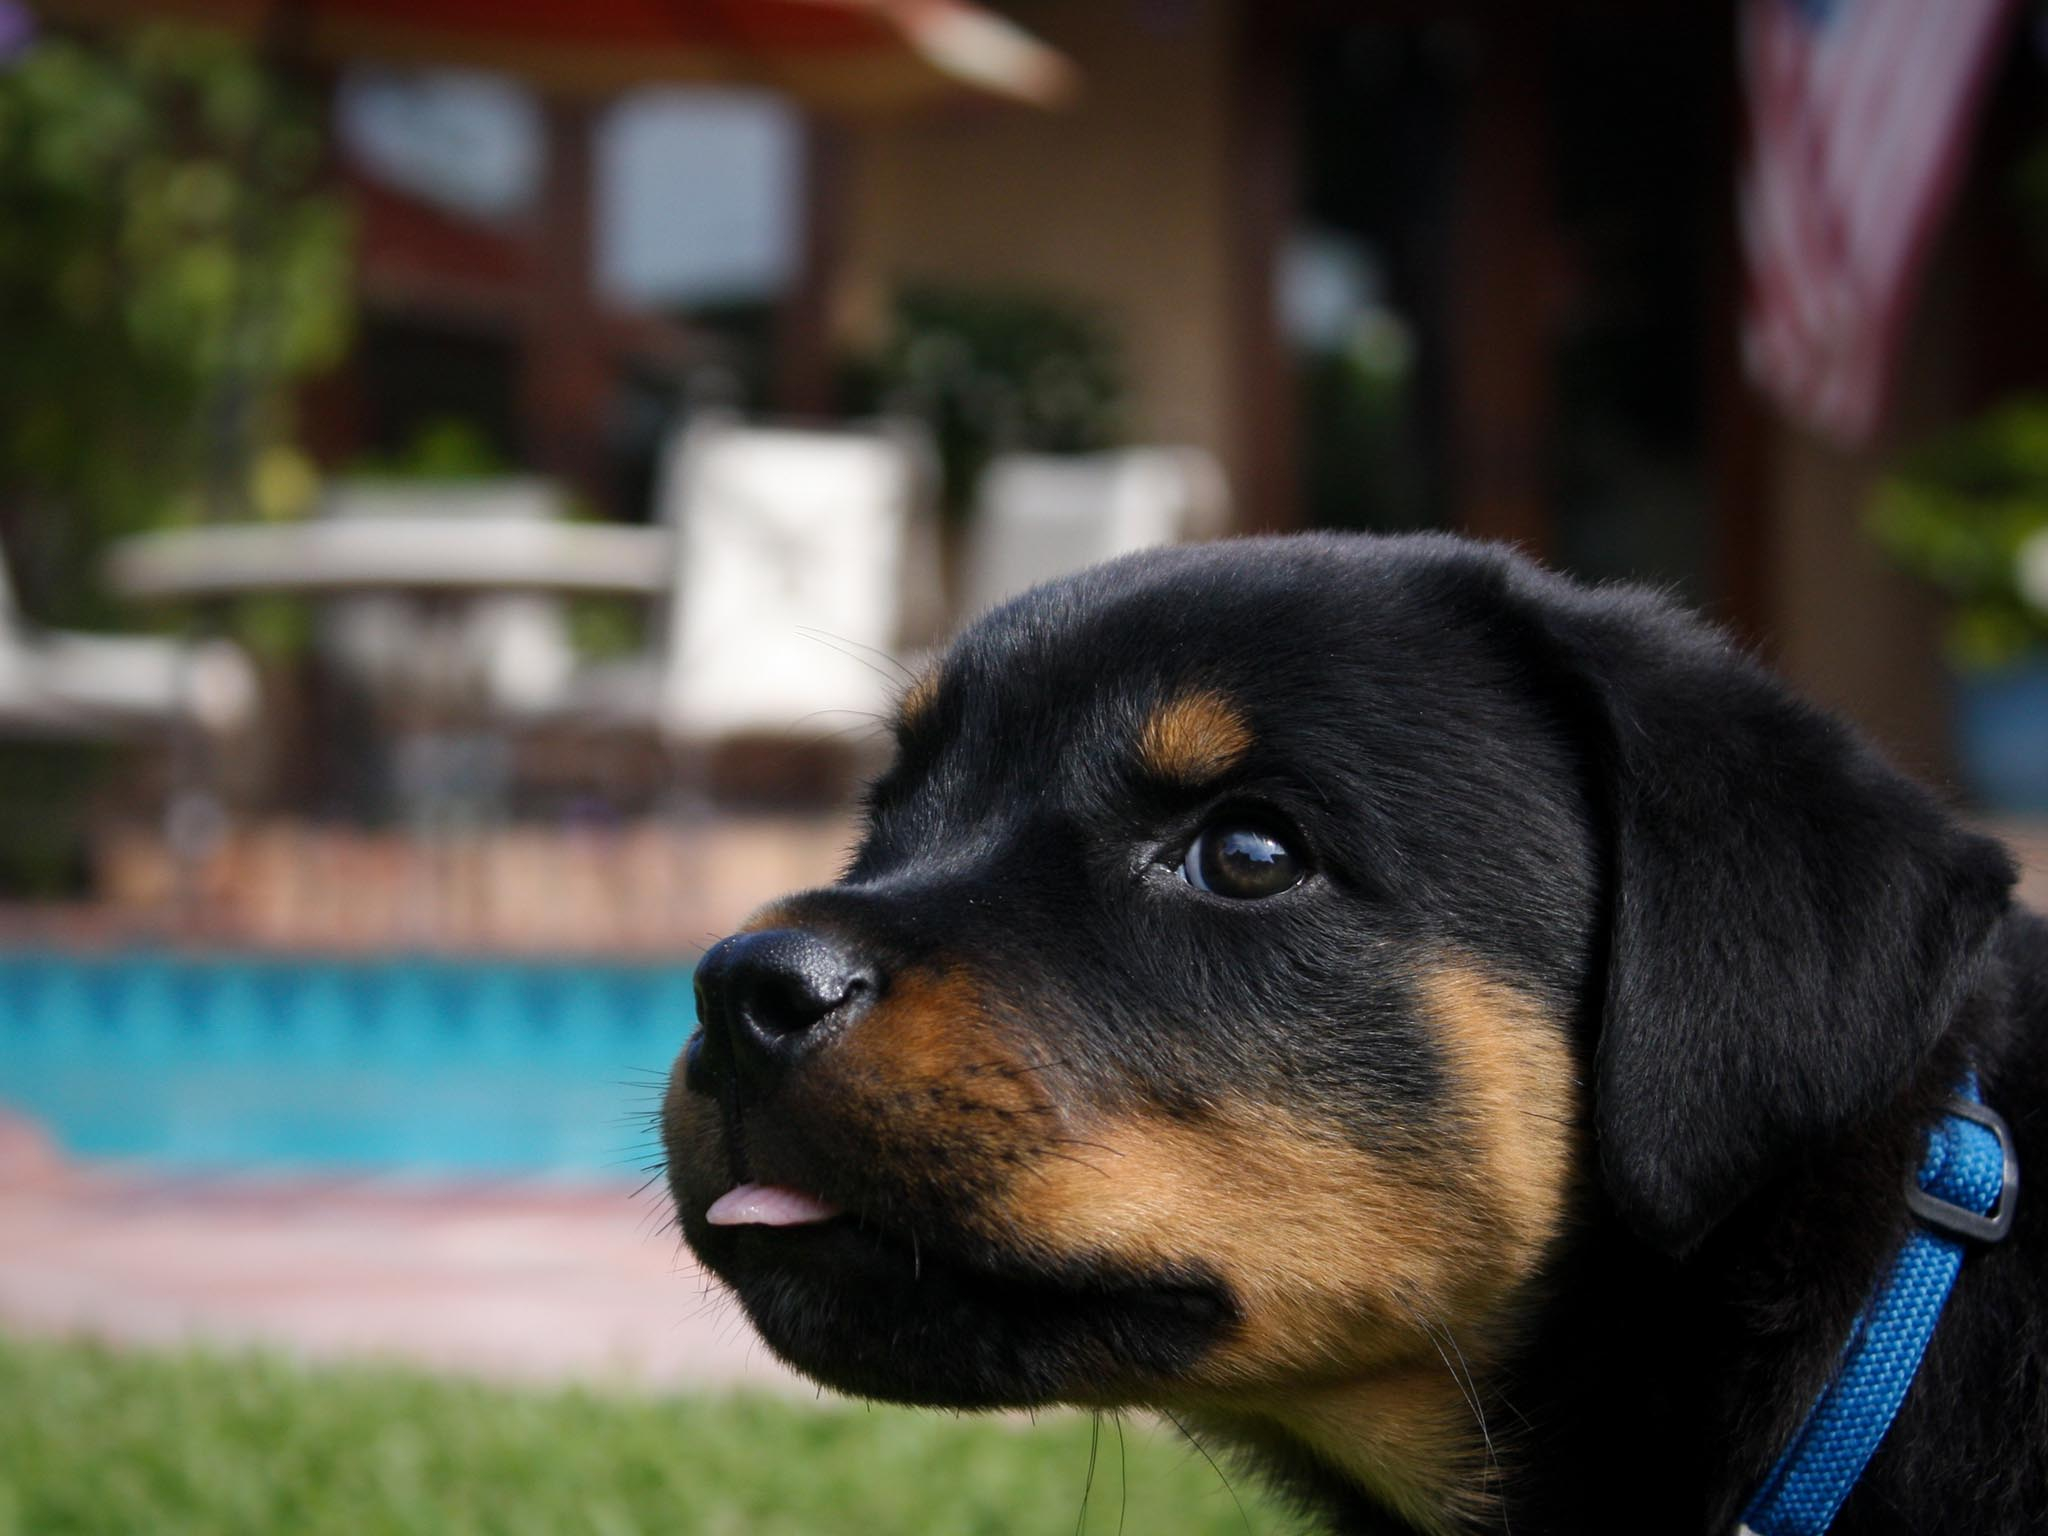 2048x1536 Adorable-Small-Rottweiler-Puppy-Wallpaper FamousDC